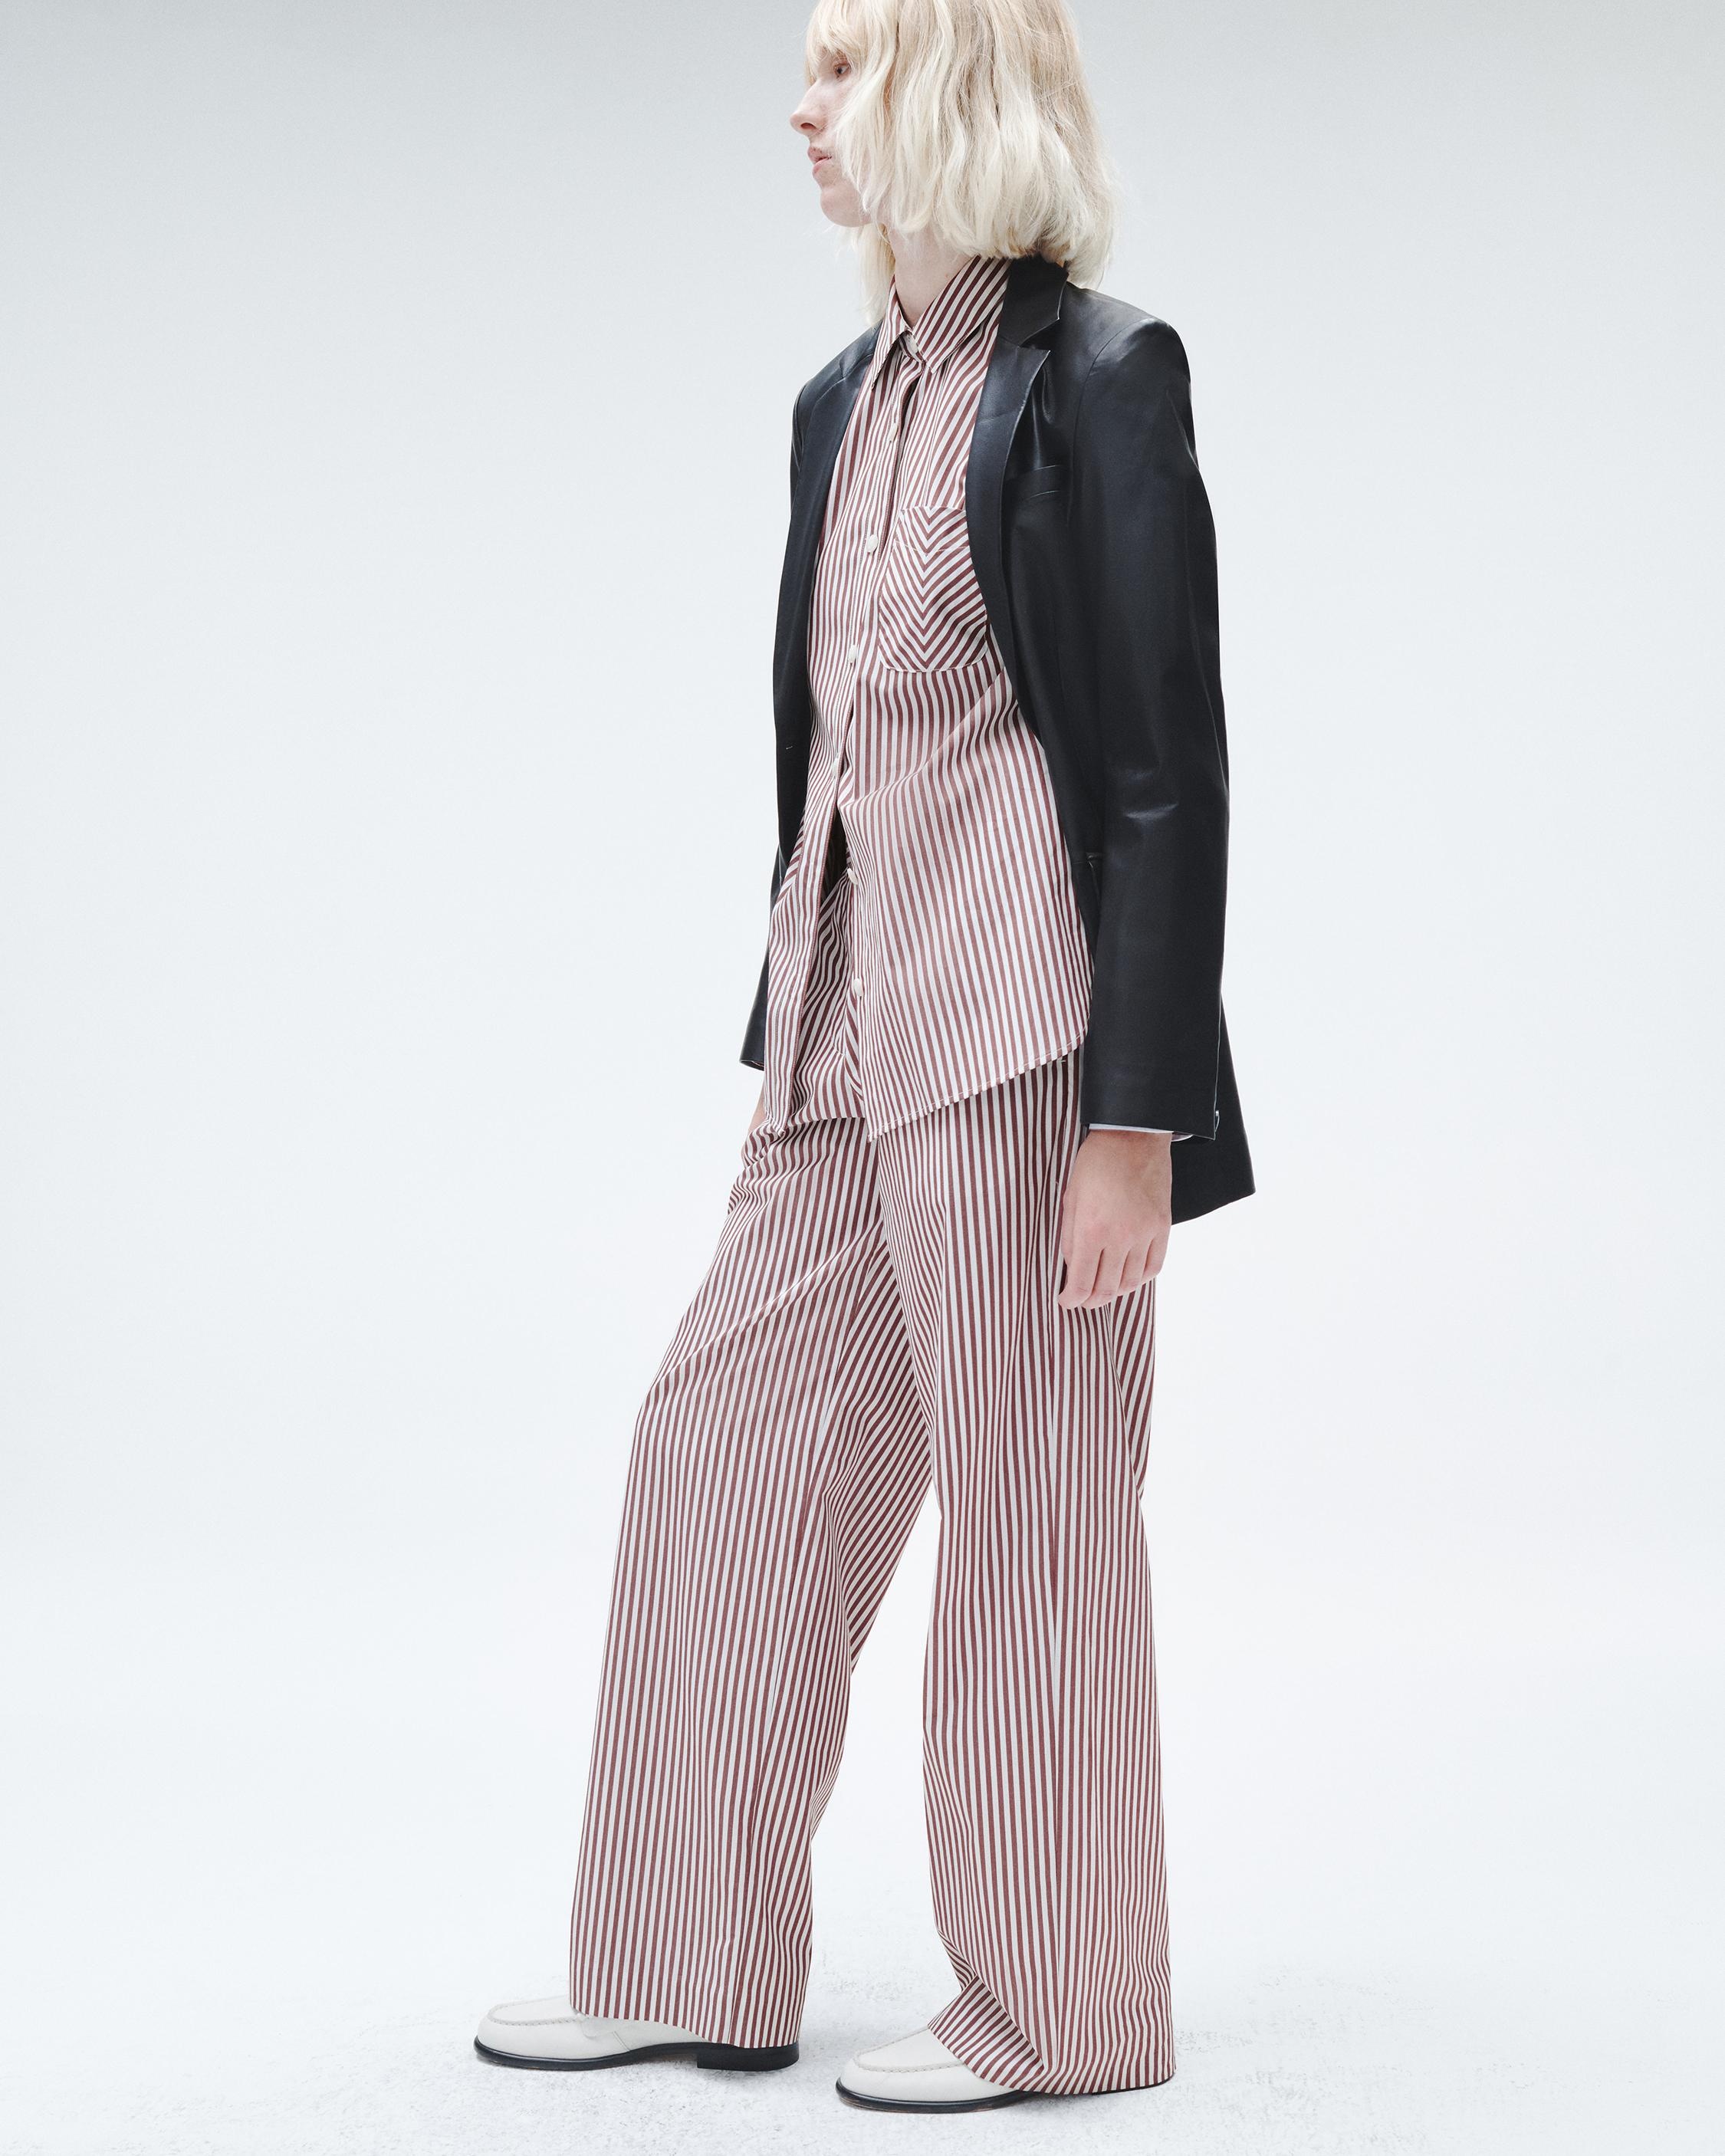 Lacey Stripe Cotton Poplin Pant
Relaxed Fit - 3